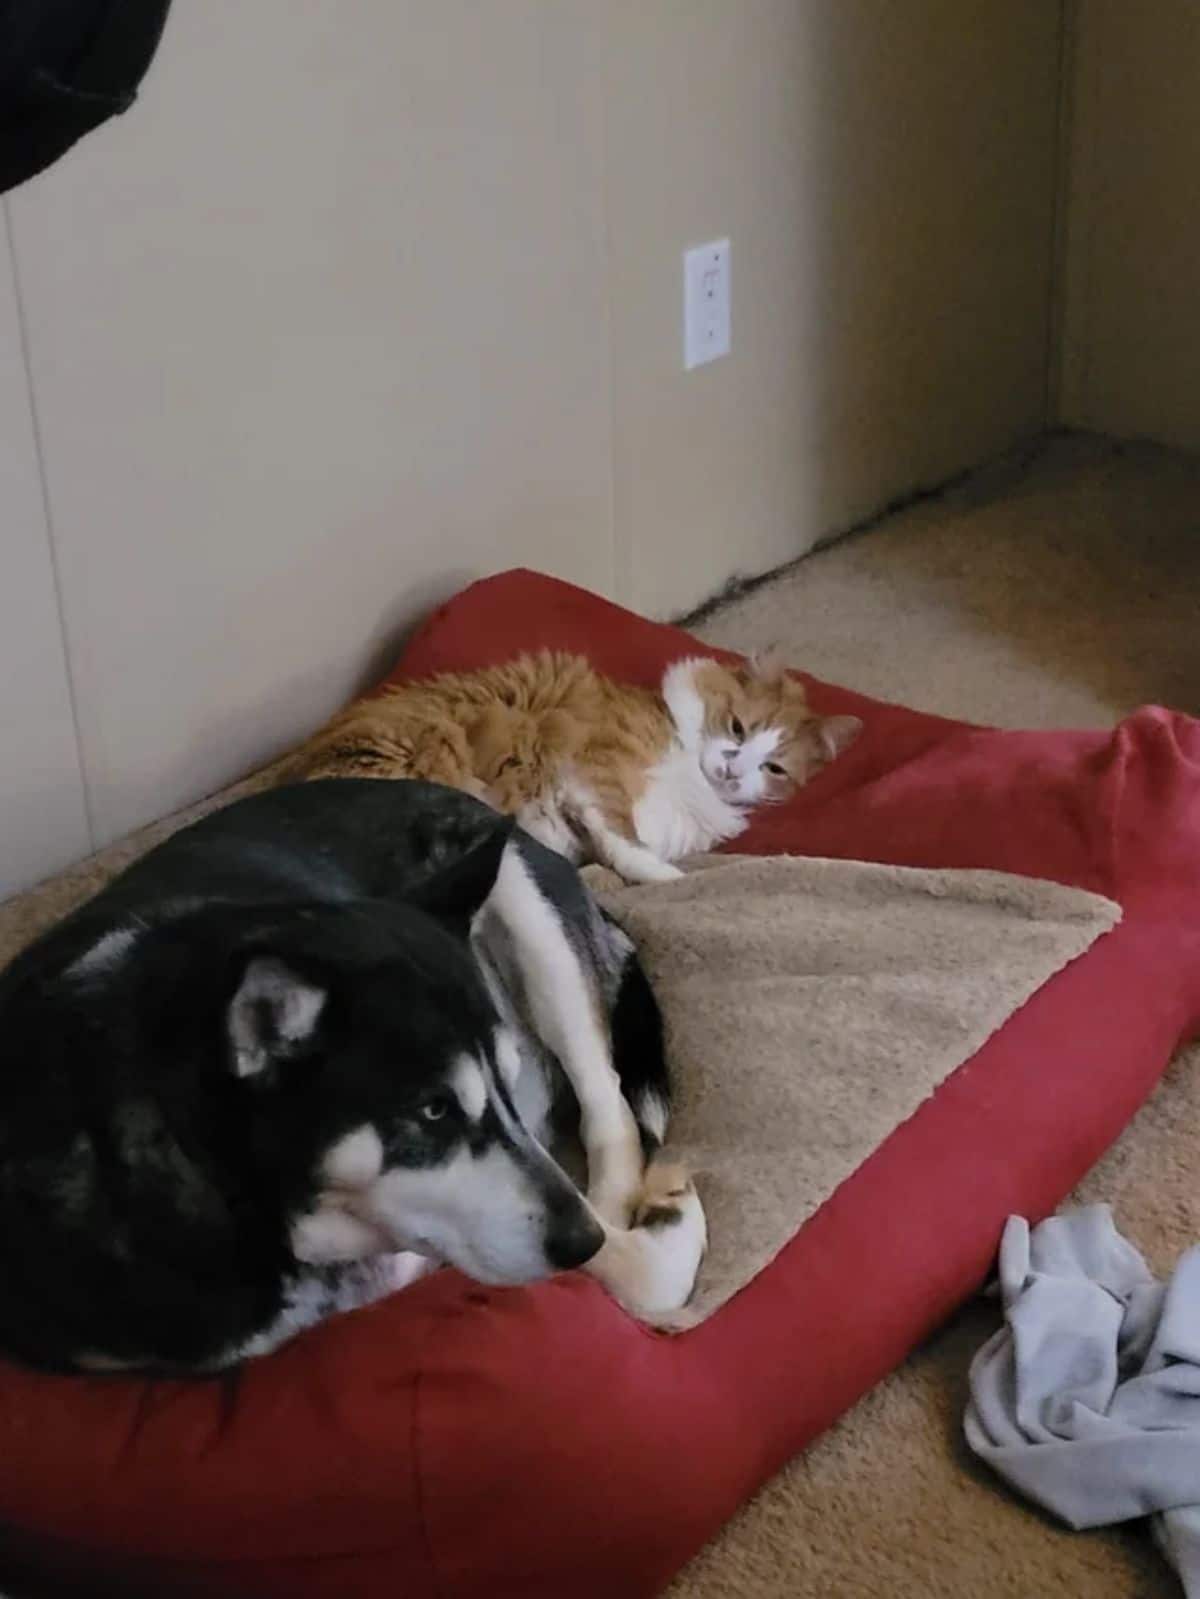 black and white husky laying on a red dog bed with an orange and white cat